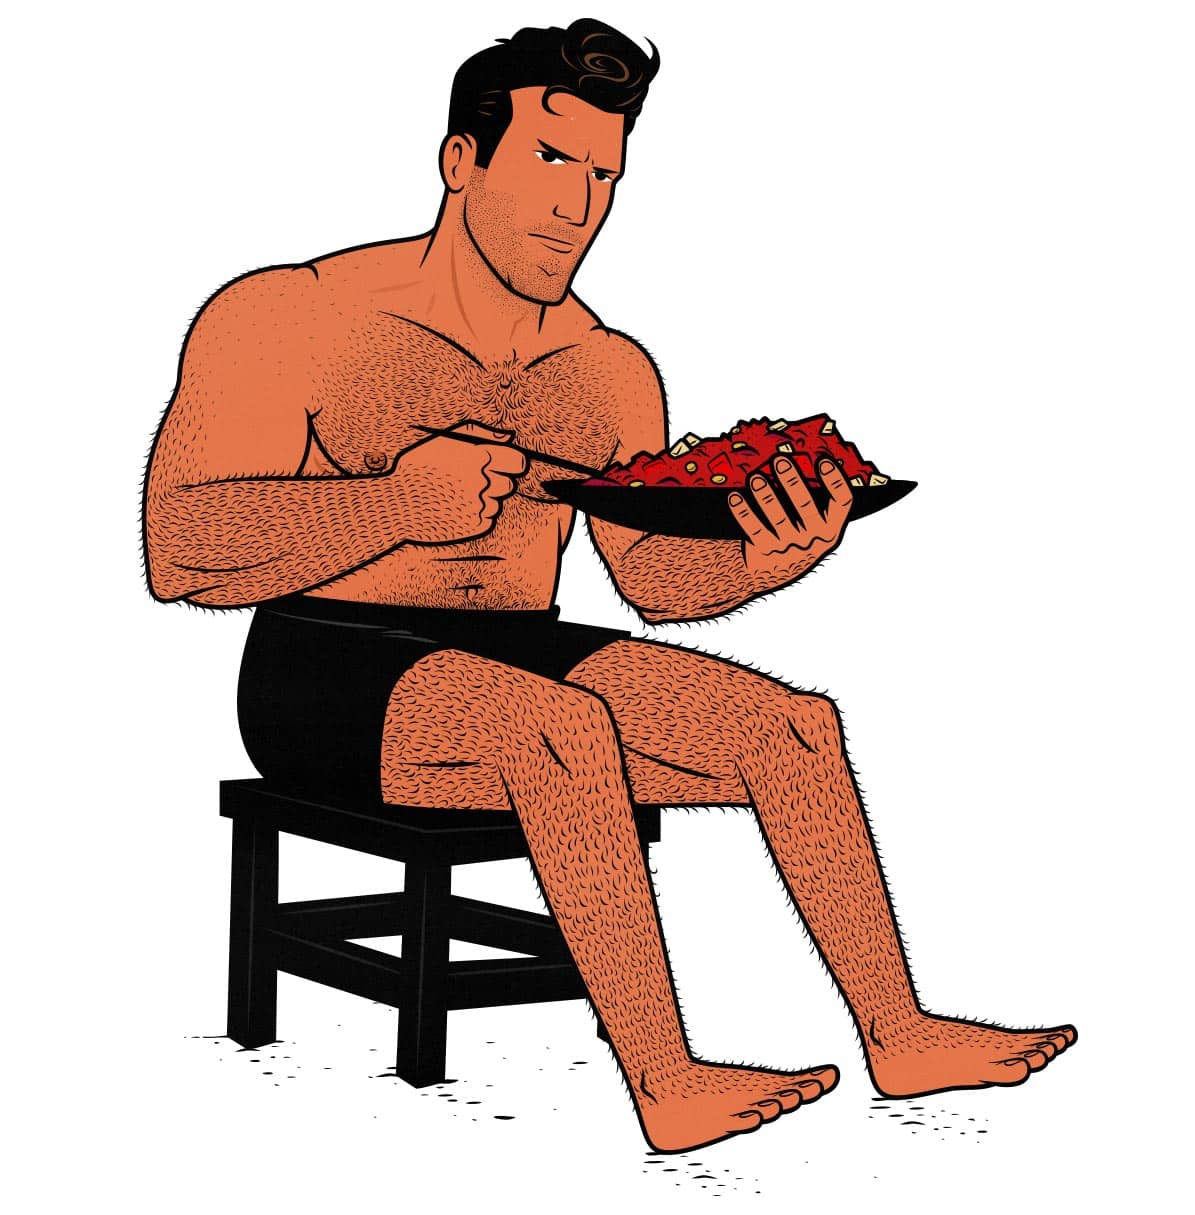 Illustration of a skinny guy bulking up by eating reheated chili from his meal prep on Sunday.